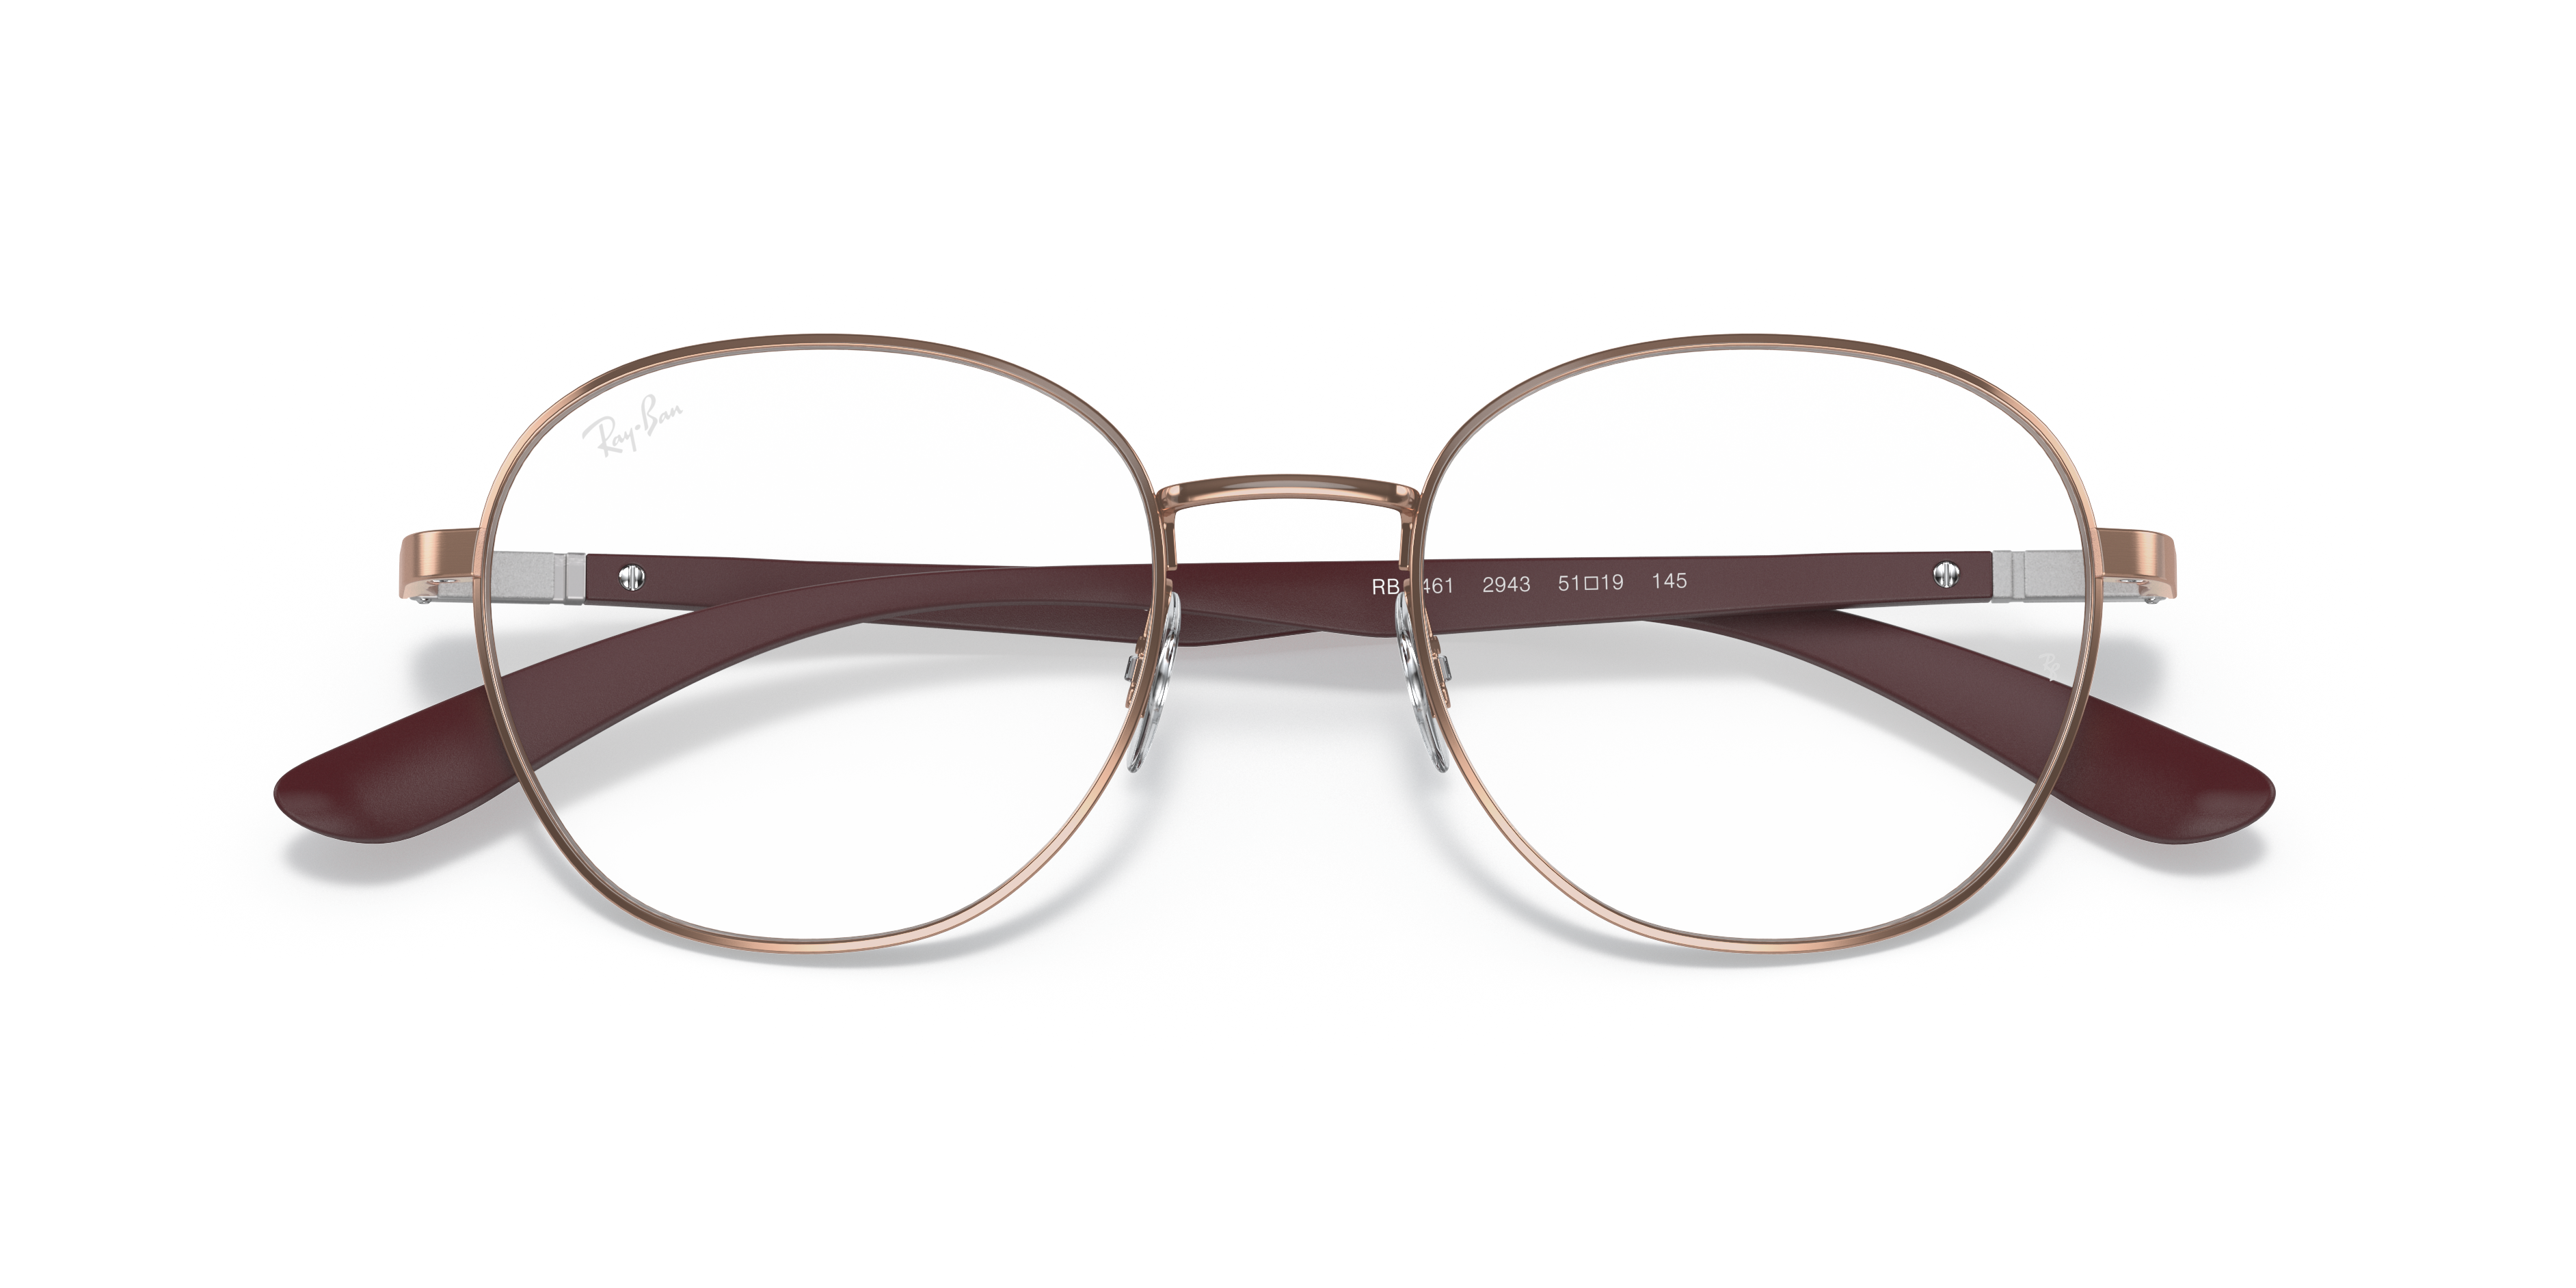 Rb6461 Optics Eyeglasses with Copper Frame | Ray-Ban®